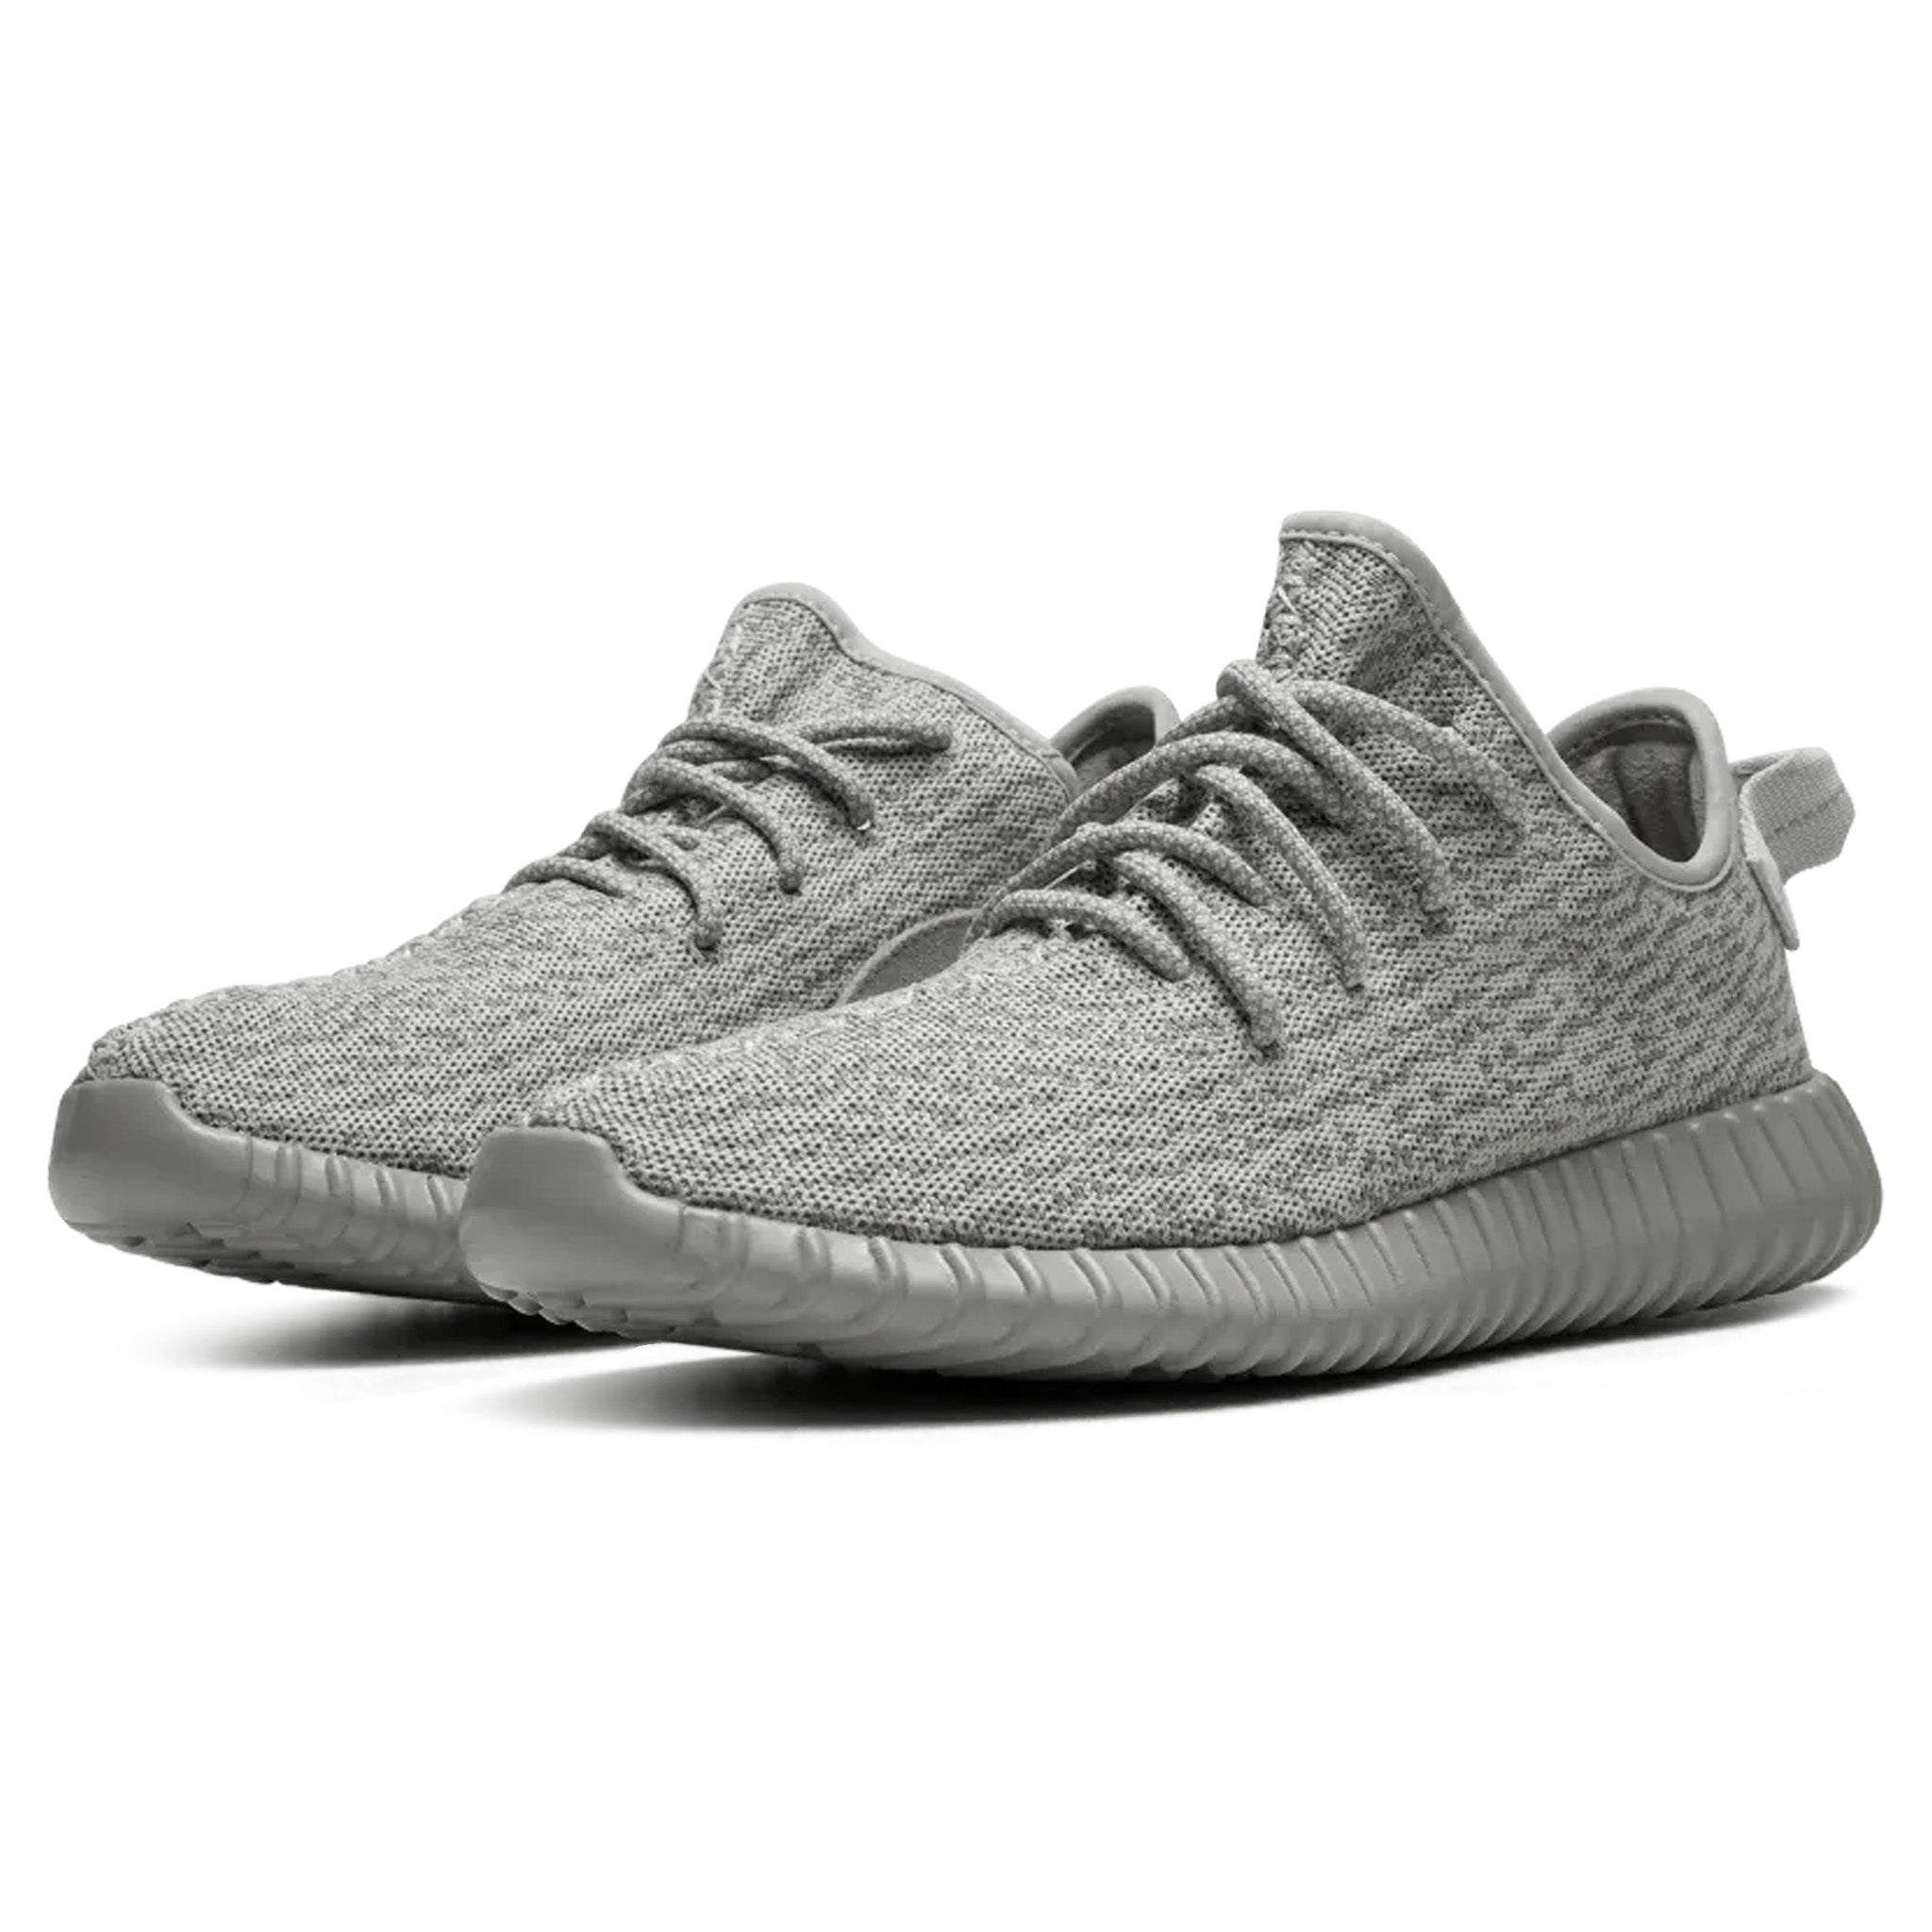 Front side view of Adidas Yeezy Boost 350 V1 Moonrock AQ2660